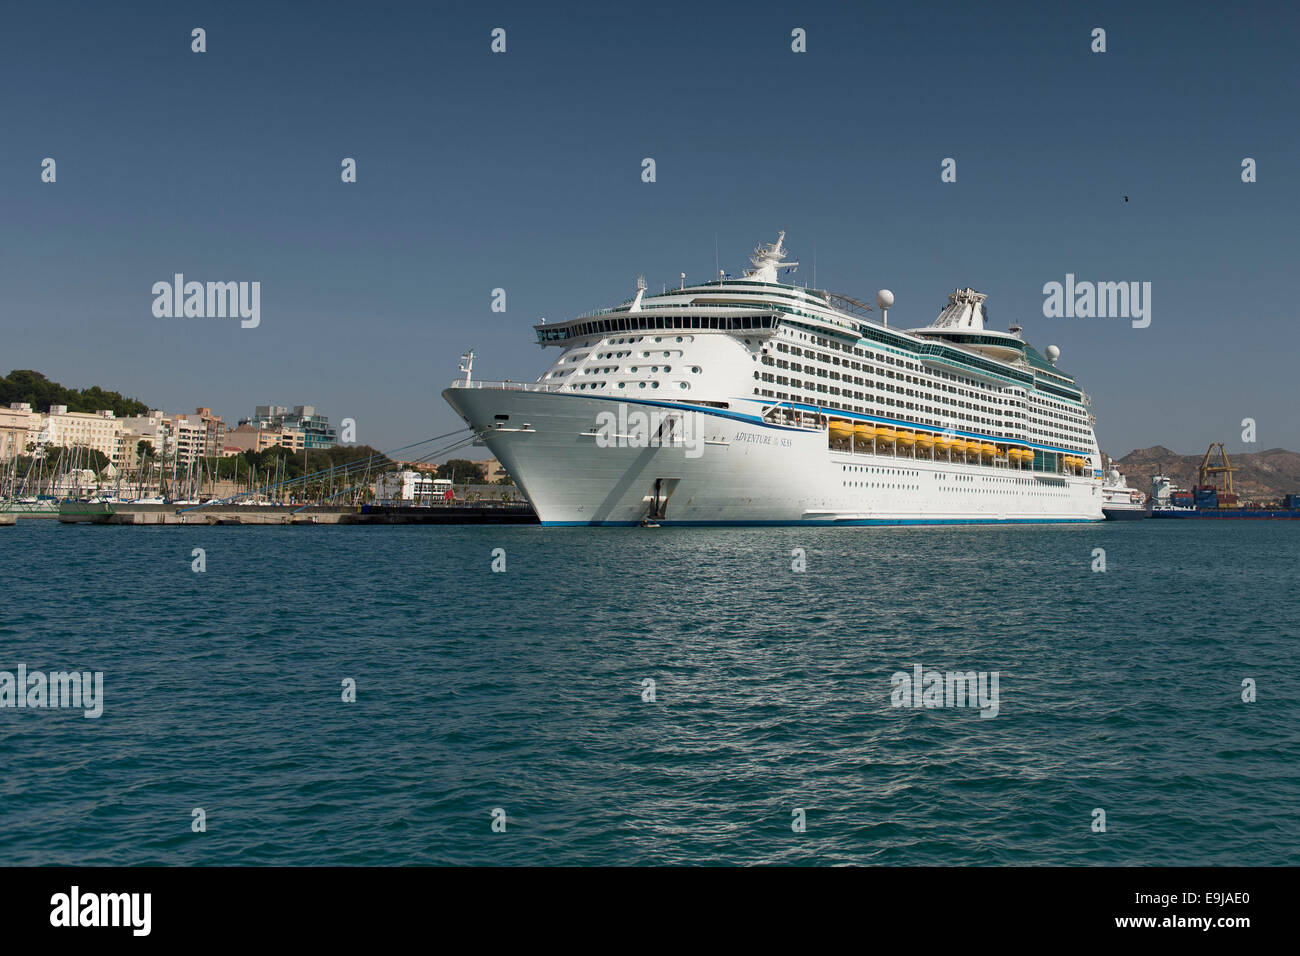 Royal Caribbean's Adventurer of the Seas cruise ship at Cartagena cruise port in Spain. Stock Photo